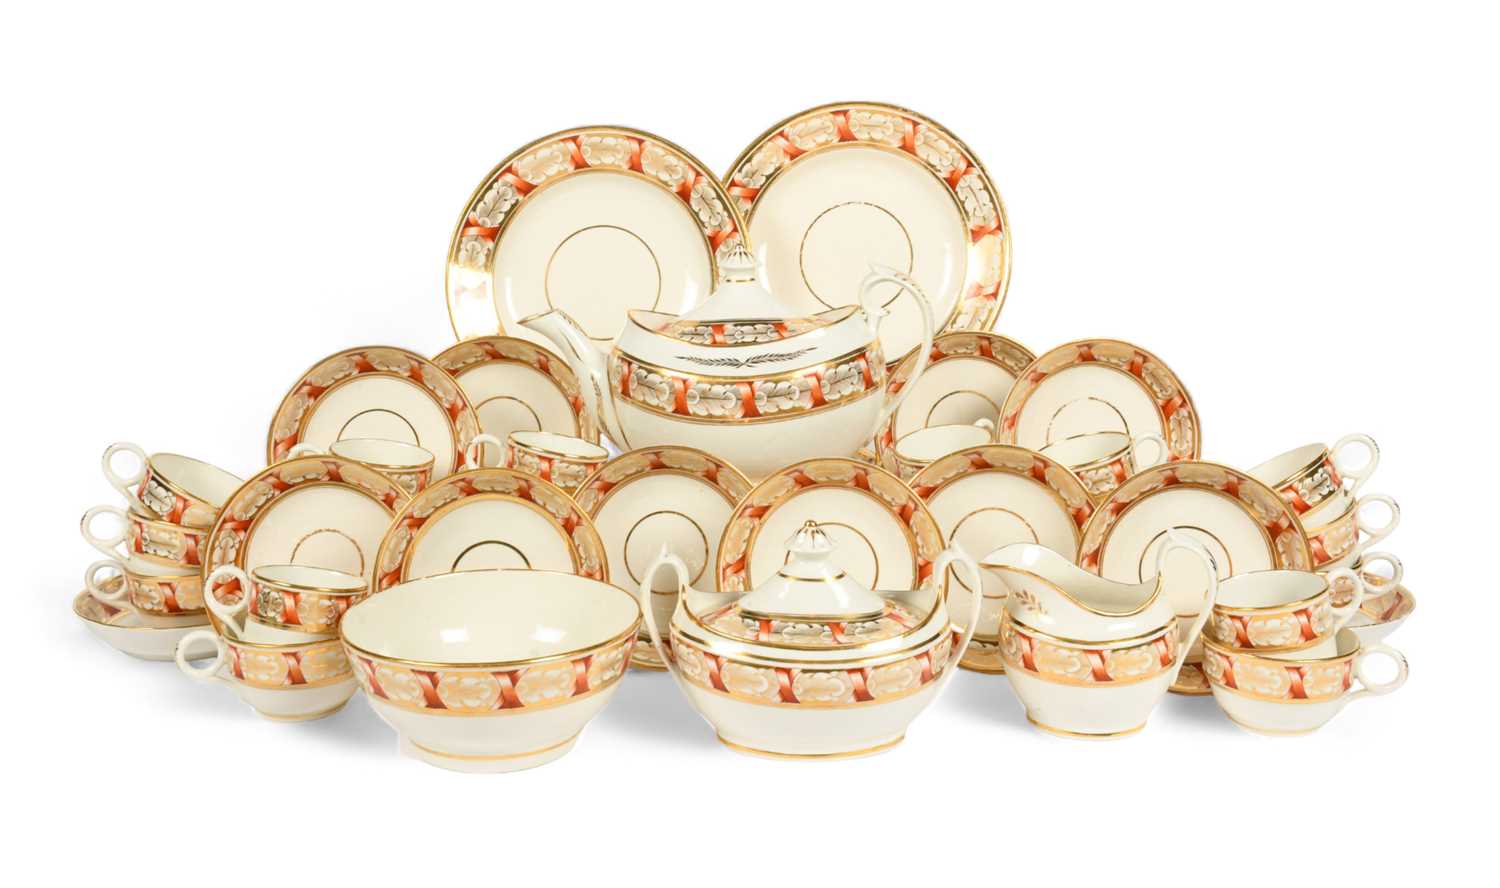 A Grainger's Worcester tea service, c.1810, decorated with bands of oak leaves wrapped in orange